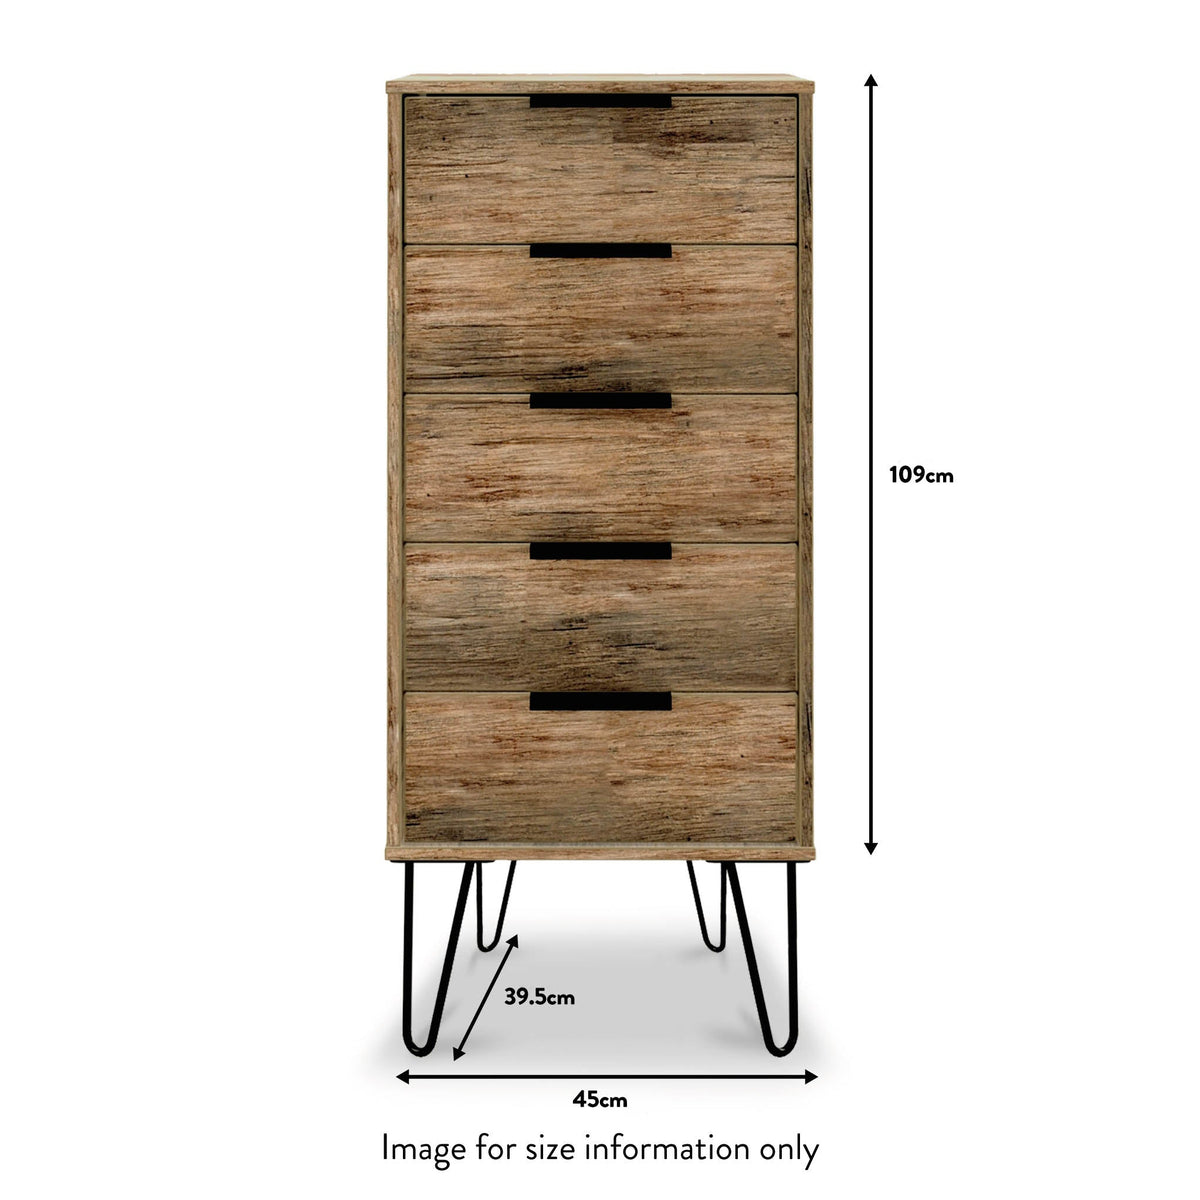 Morena Rustic Oak Effect 5 Drawer Tallboy Chest with Black Hairpin Legs size guide